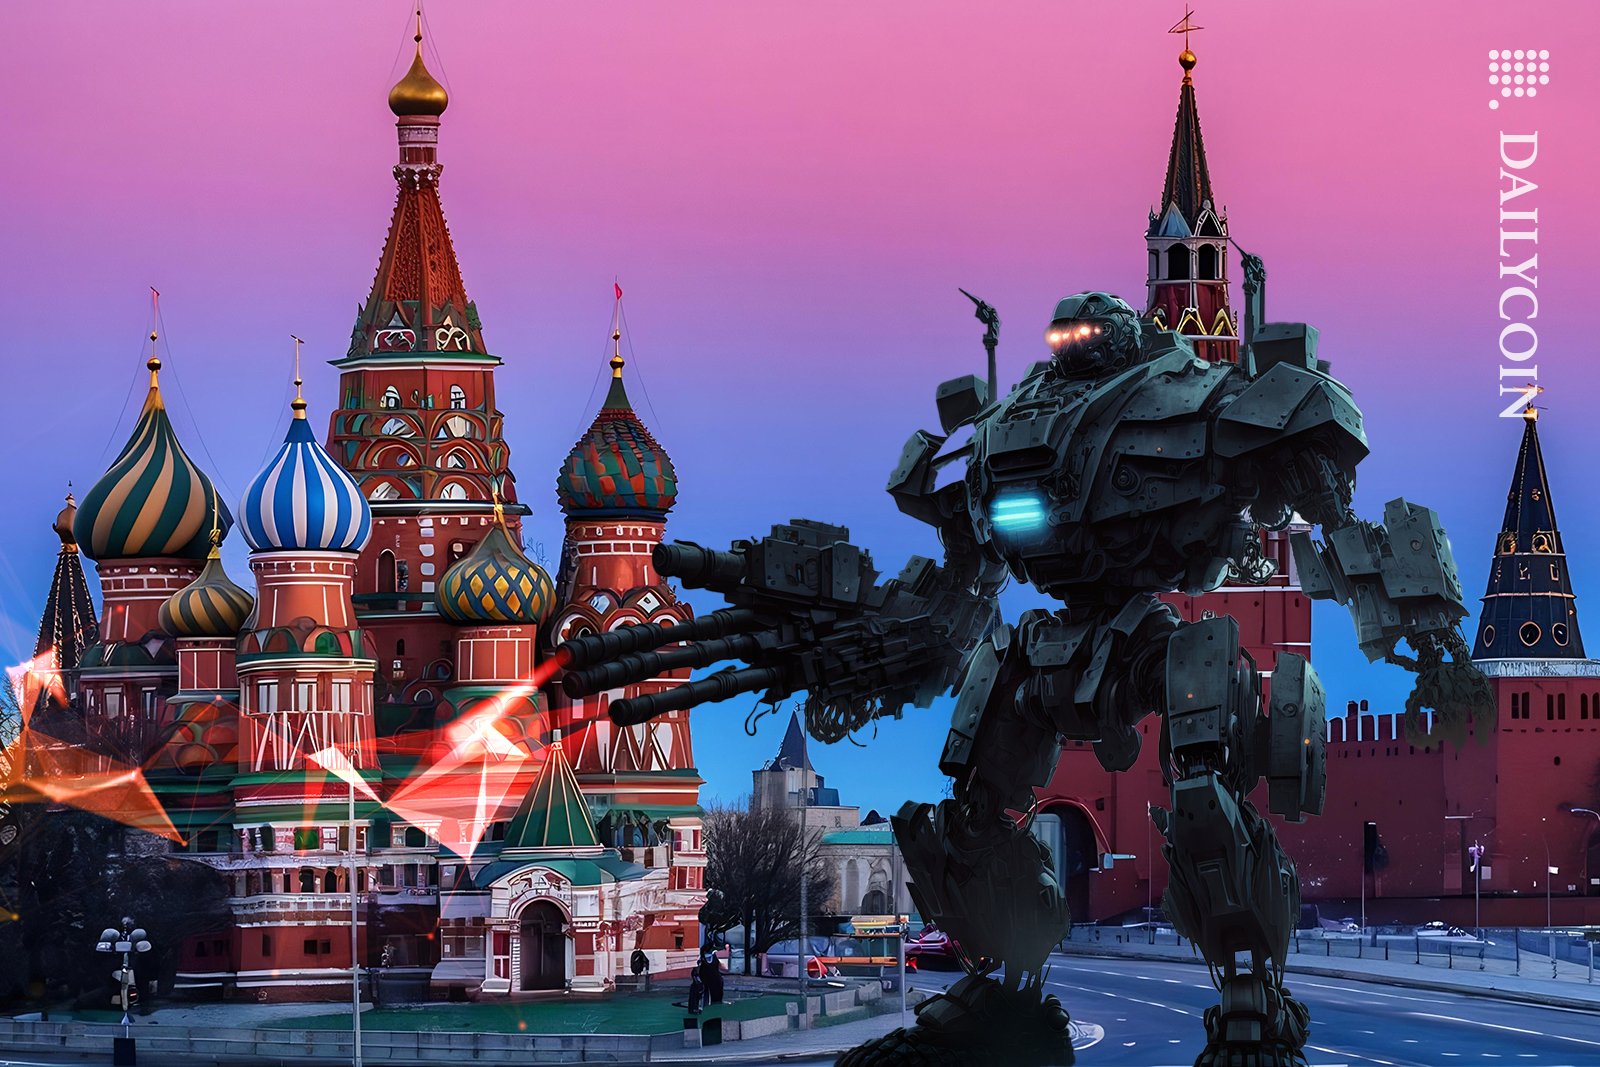 War robot searching for crypto with his defi gun in Russia.